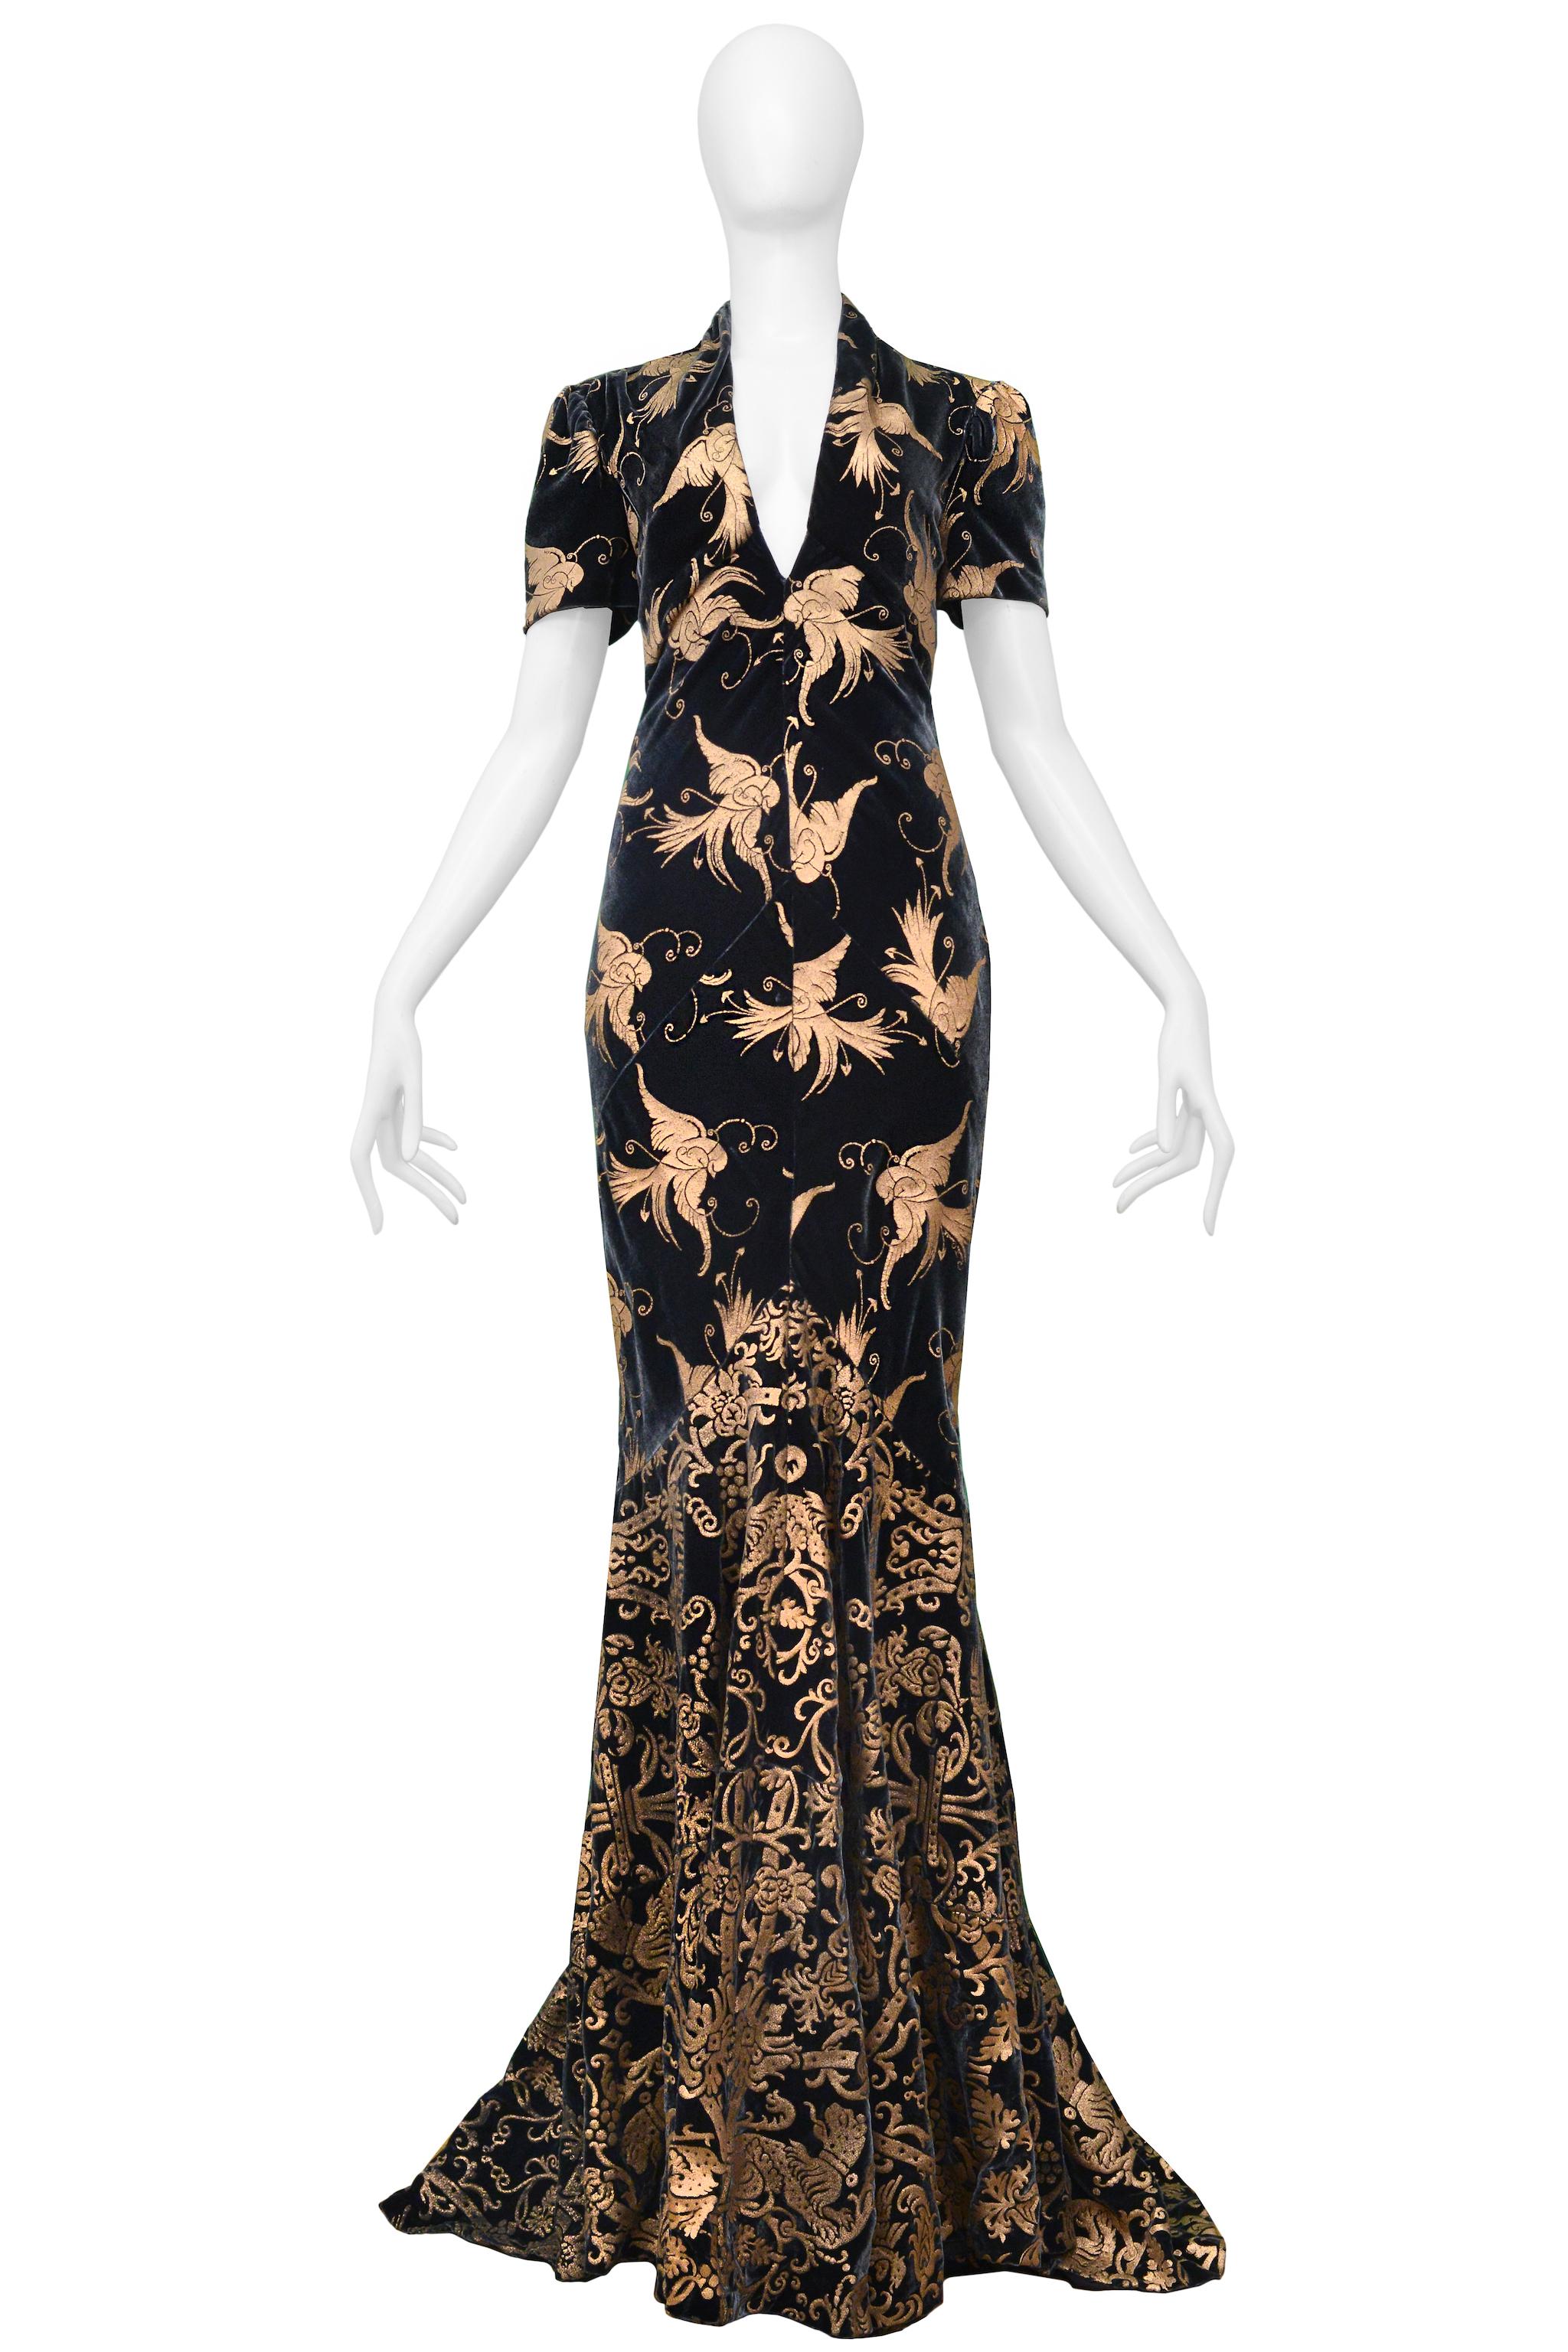 Resurrection Vintage is excited to present a vintage Roberto Cavalli green velvet evening gown featuring a metallic gold bird print, deep V neckline, exposed back cutout, button collar, short sleeves, center back zipper, and dramatic gown length